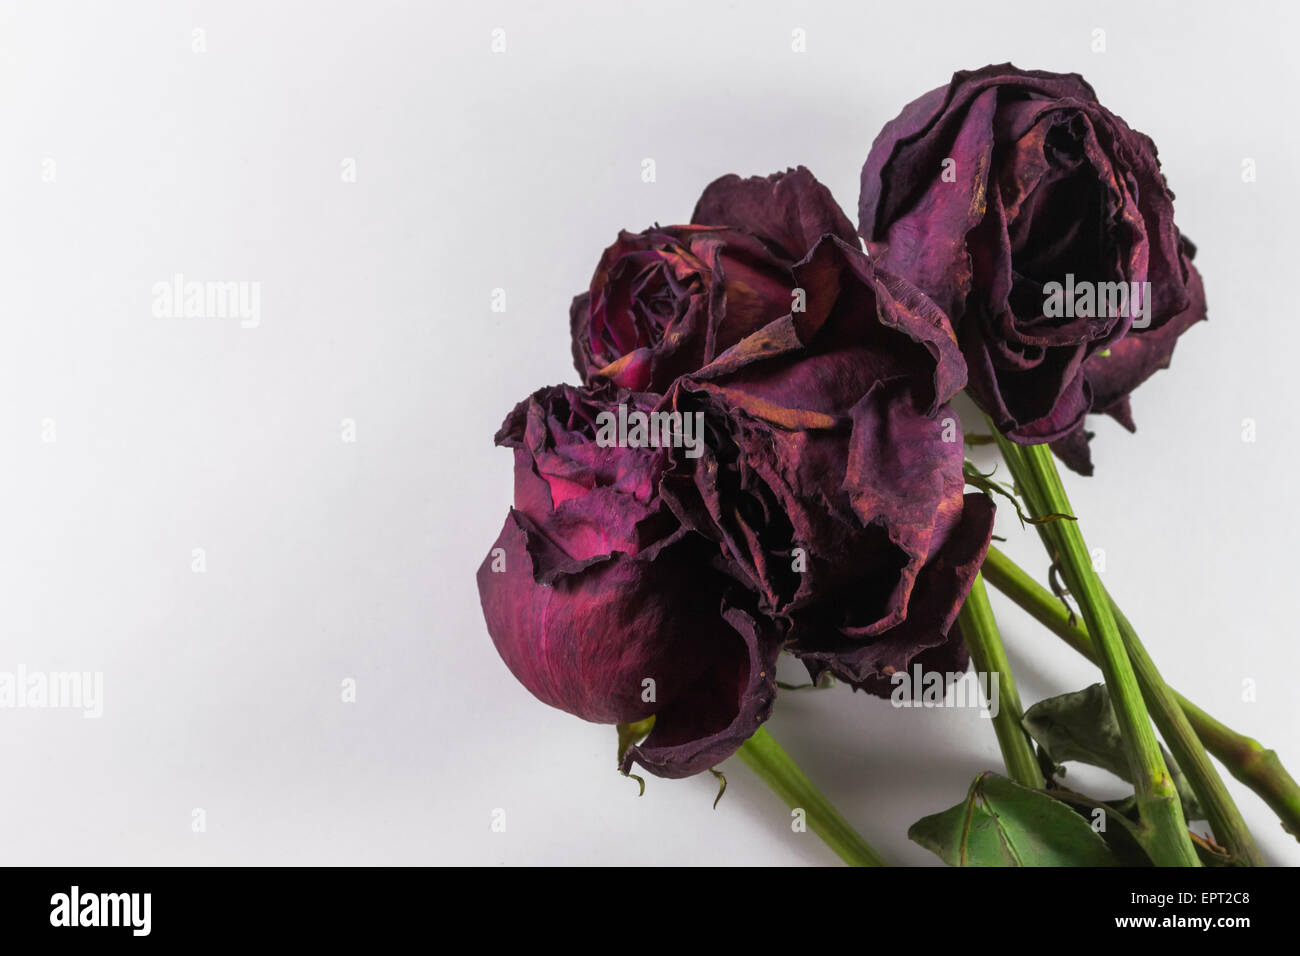 Bunch of dying red roses on a white background Stock Photo